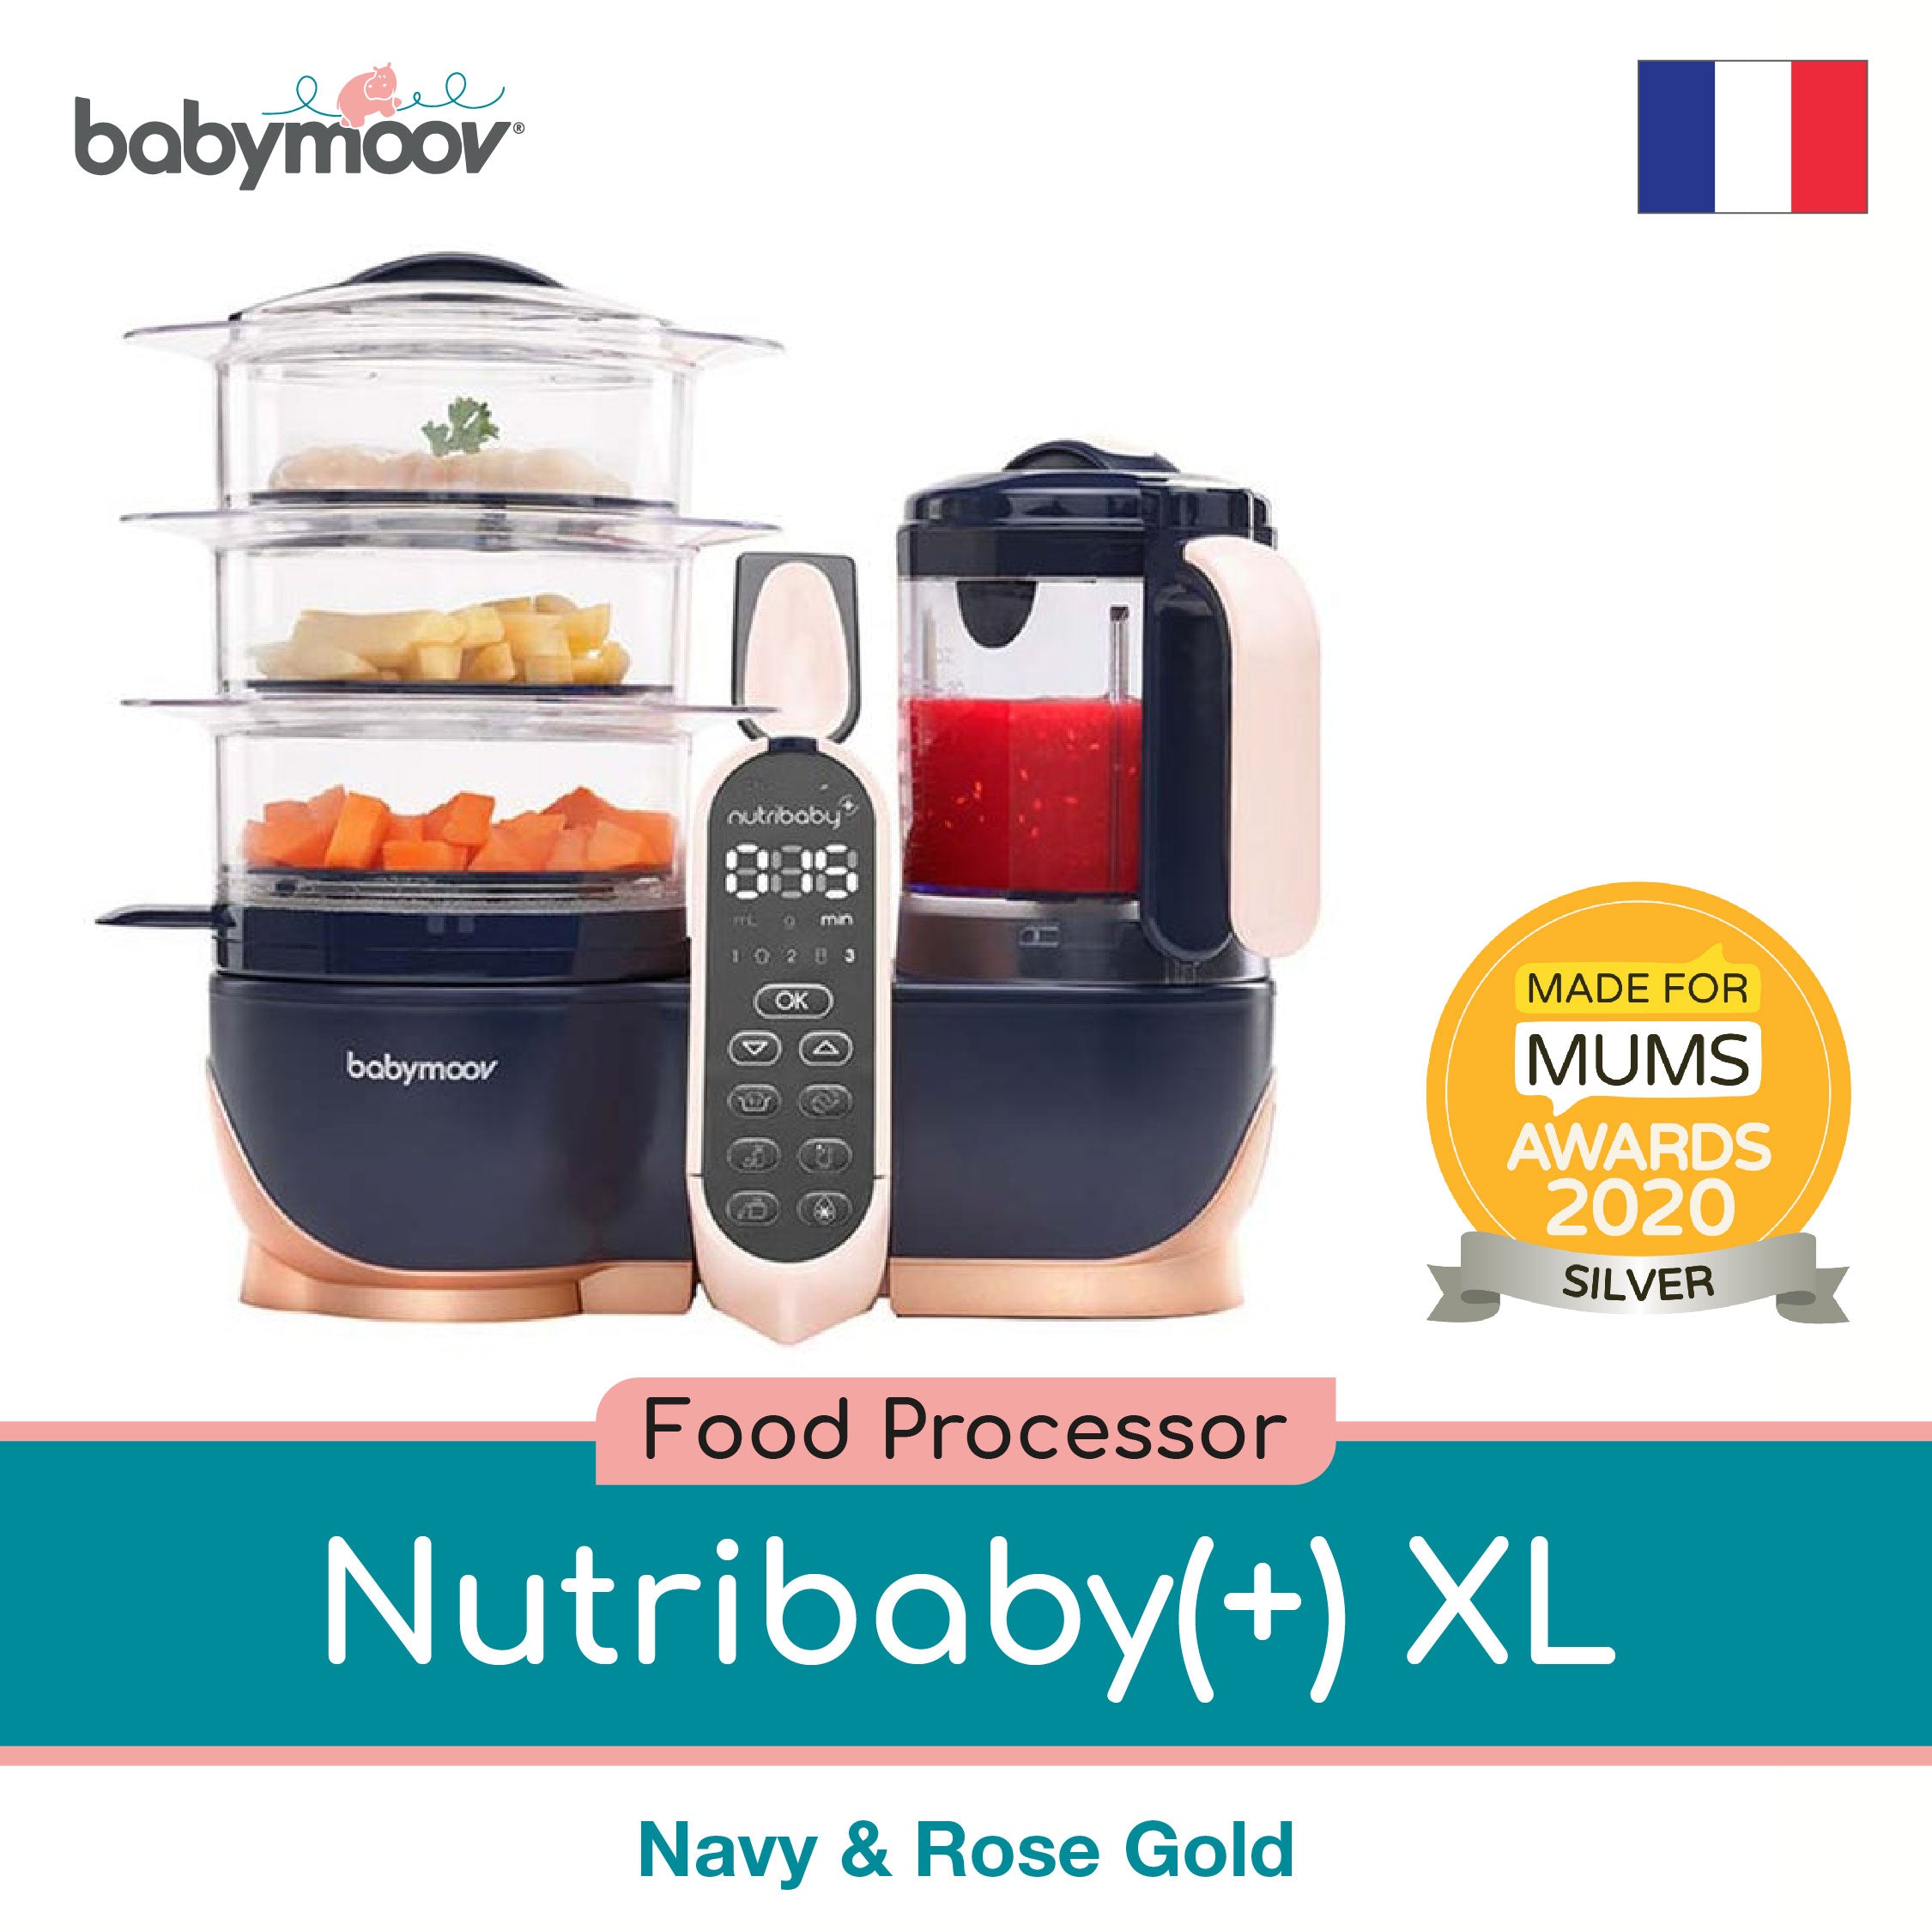 Babymoov Nutribaby(+) XL 6-in-1 Large Capacity Multi-Purpose Baby and